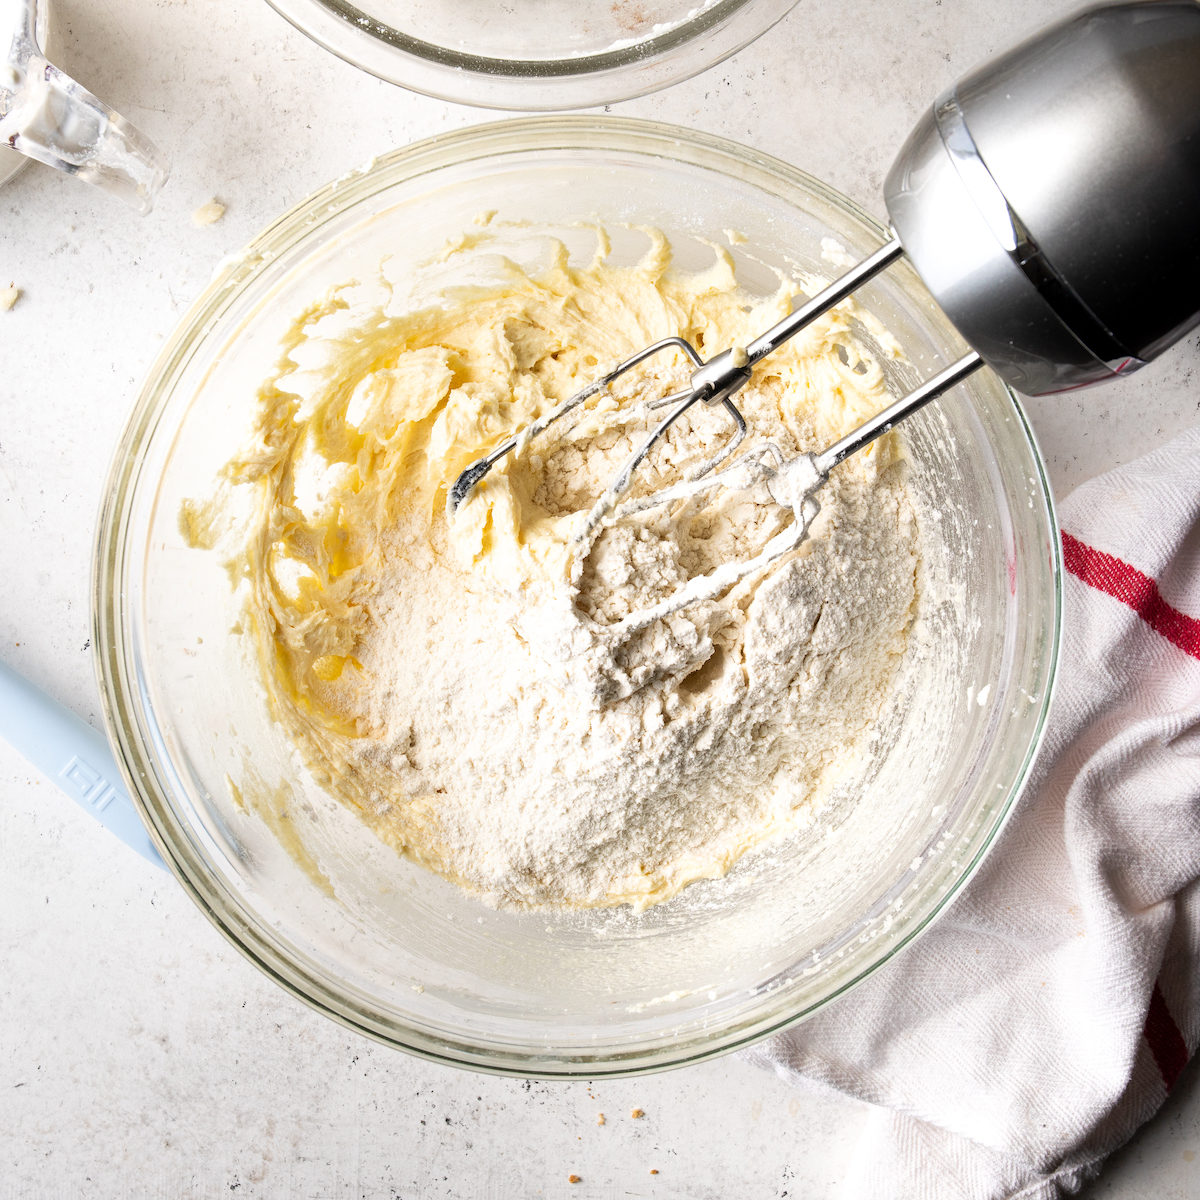 Adding half of the flour to the cake batter.